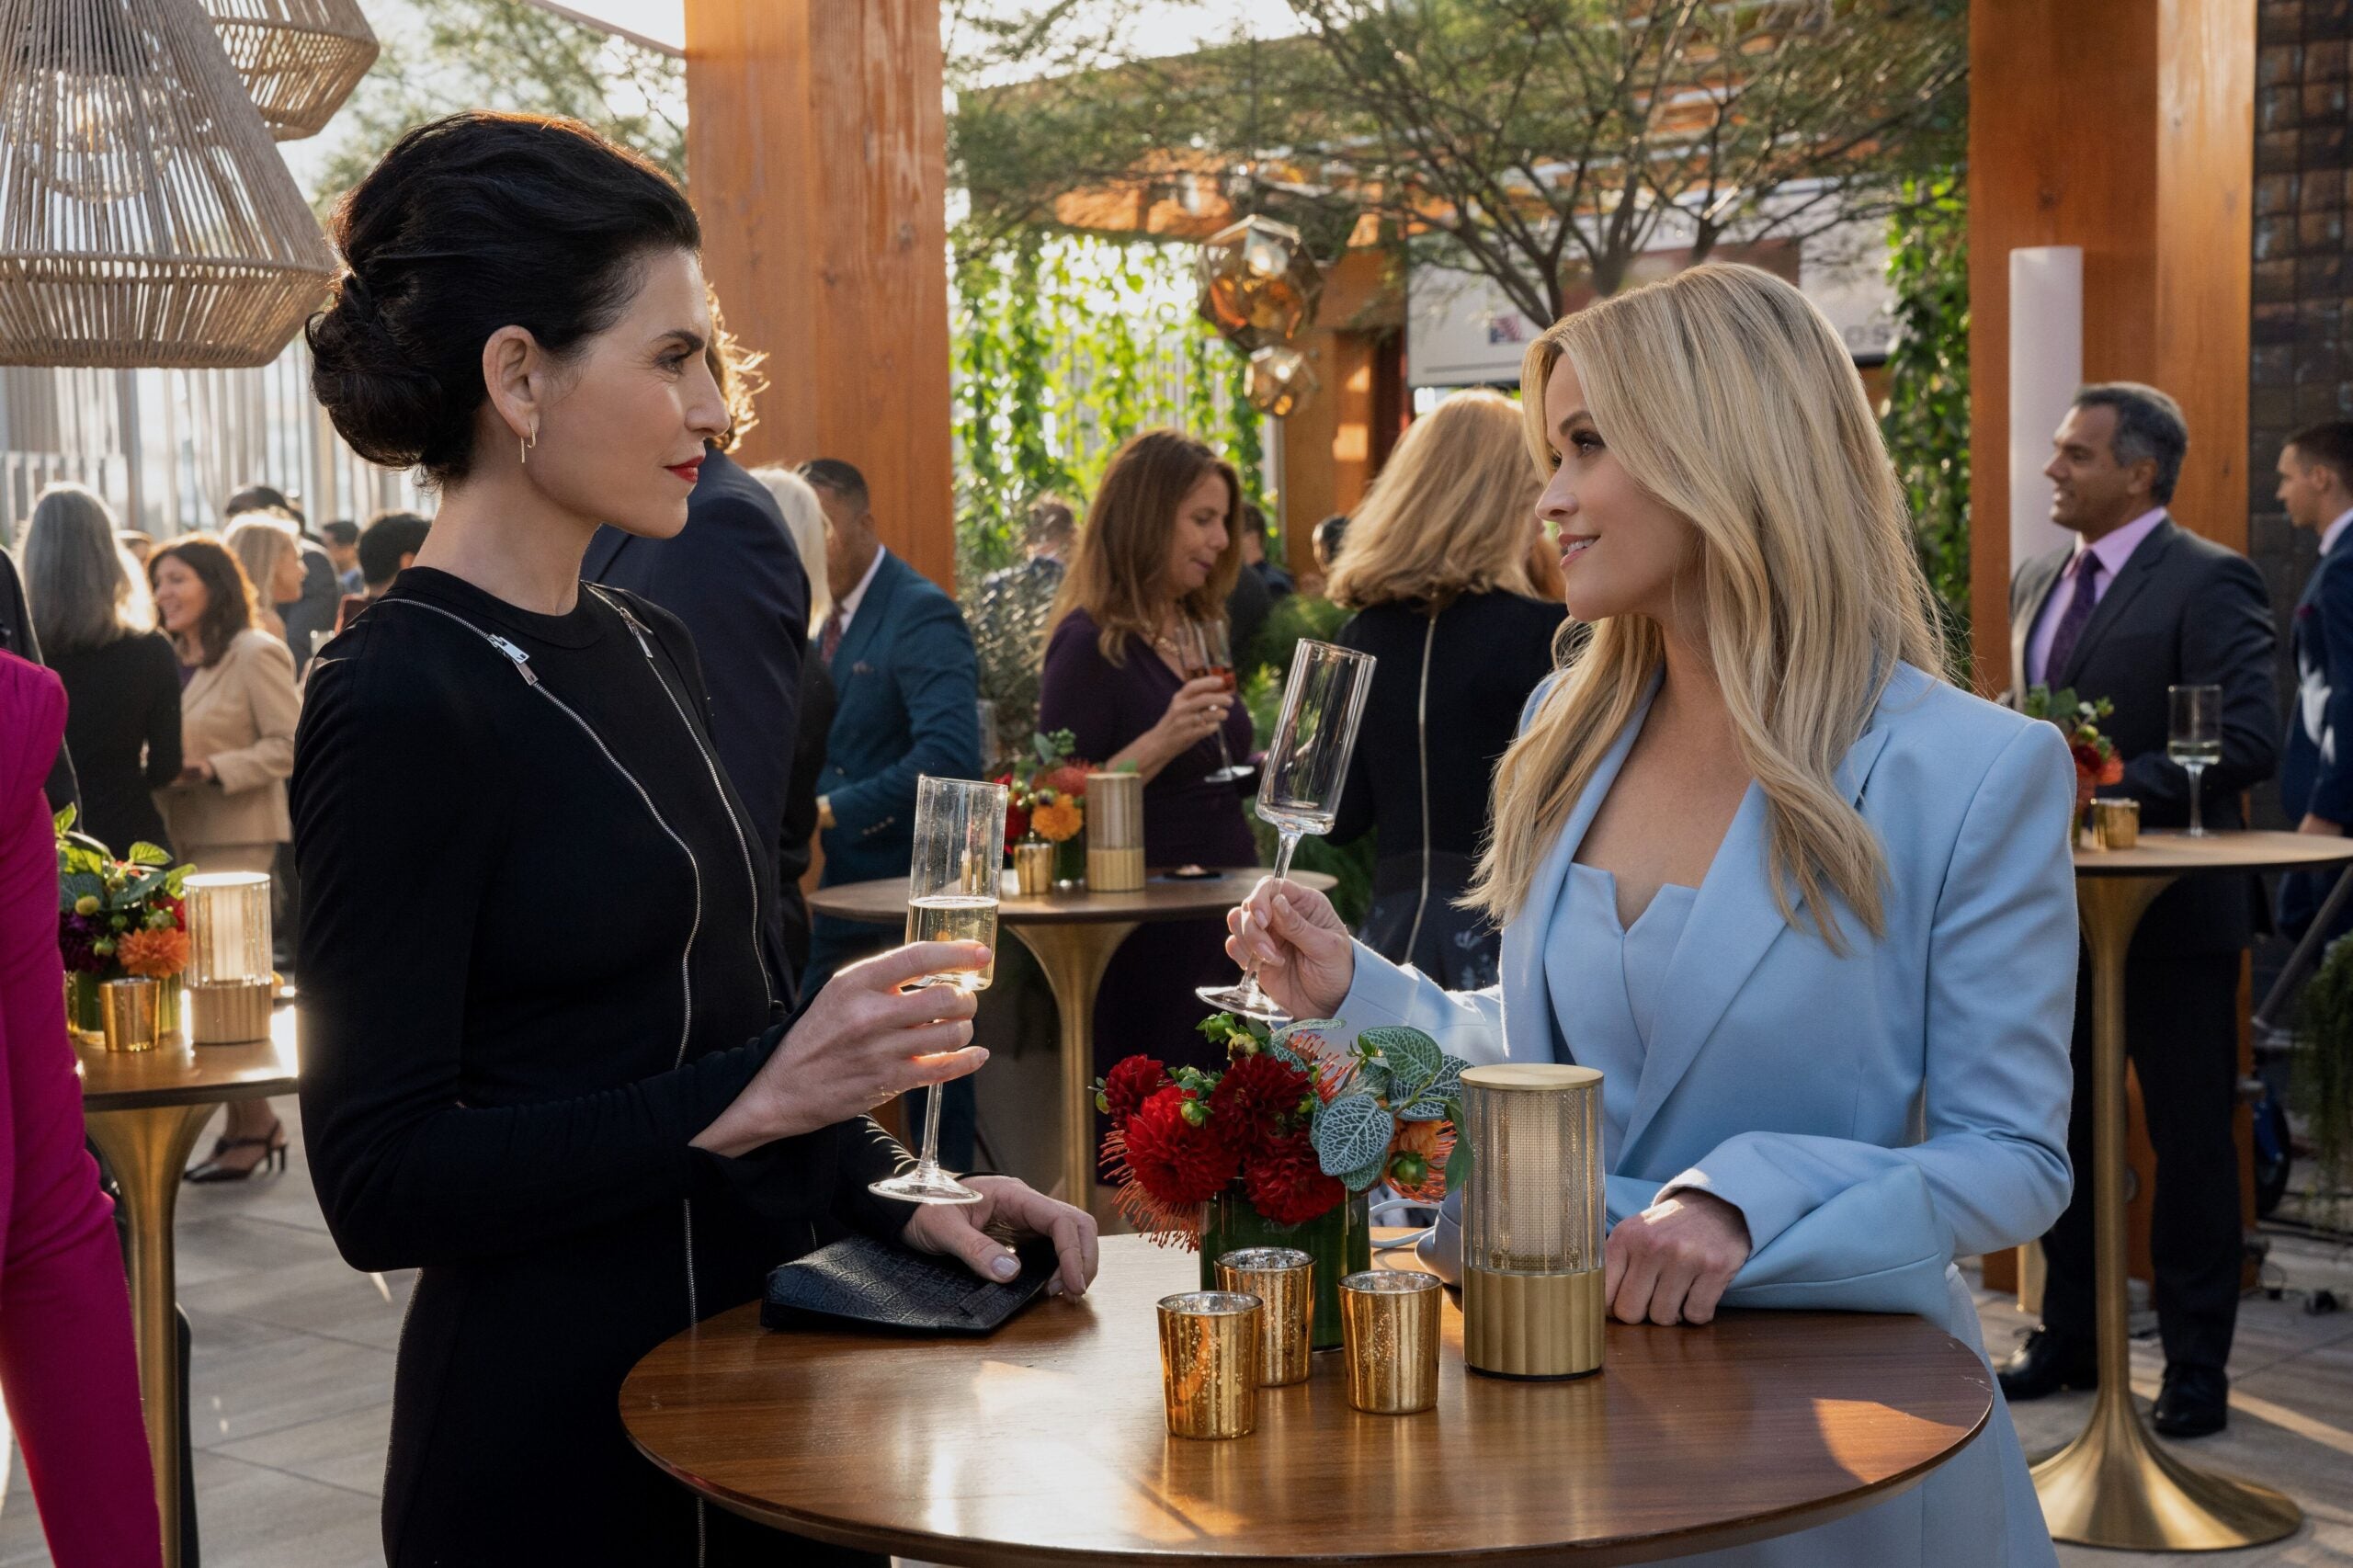 Julianna Margulies (left) and Reese Witherspoon in "The Morning Show."